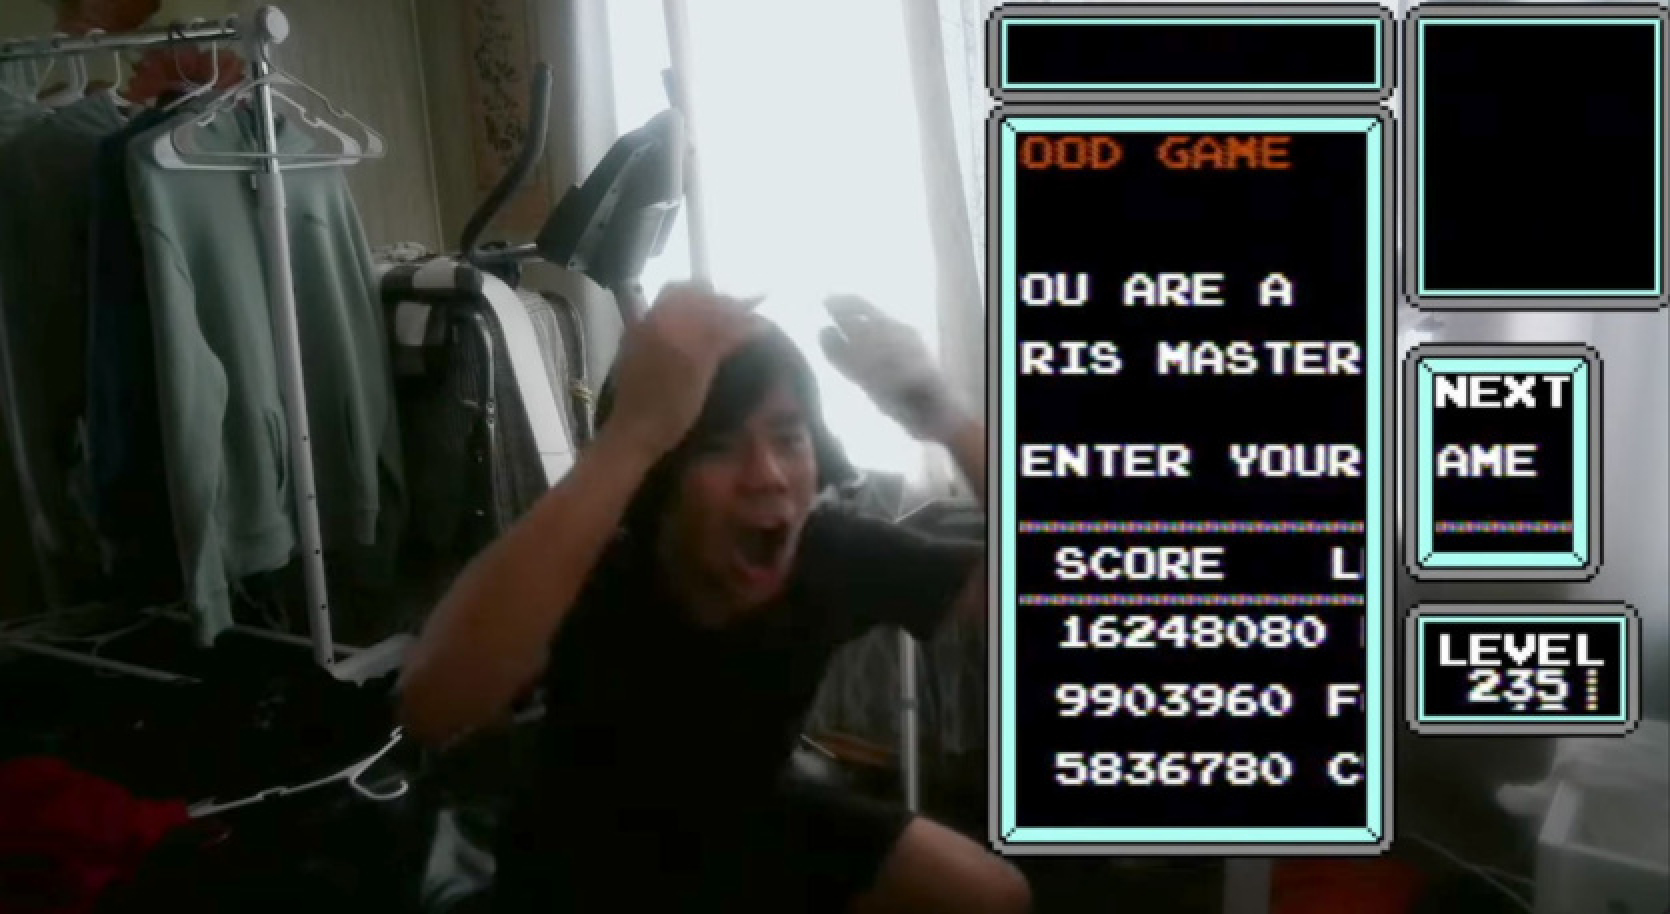 A teenager broke 6 world records in Tetris on the NES - and won a cash prize as the first player with 10 million points